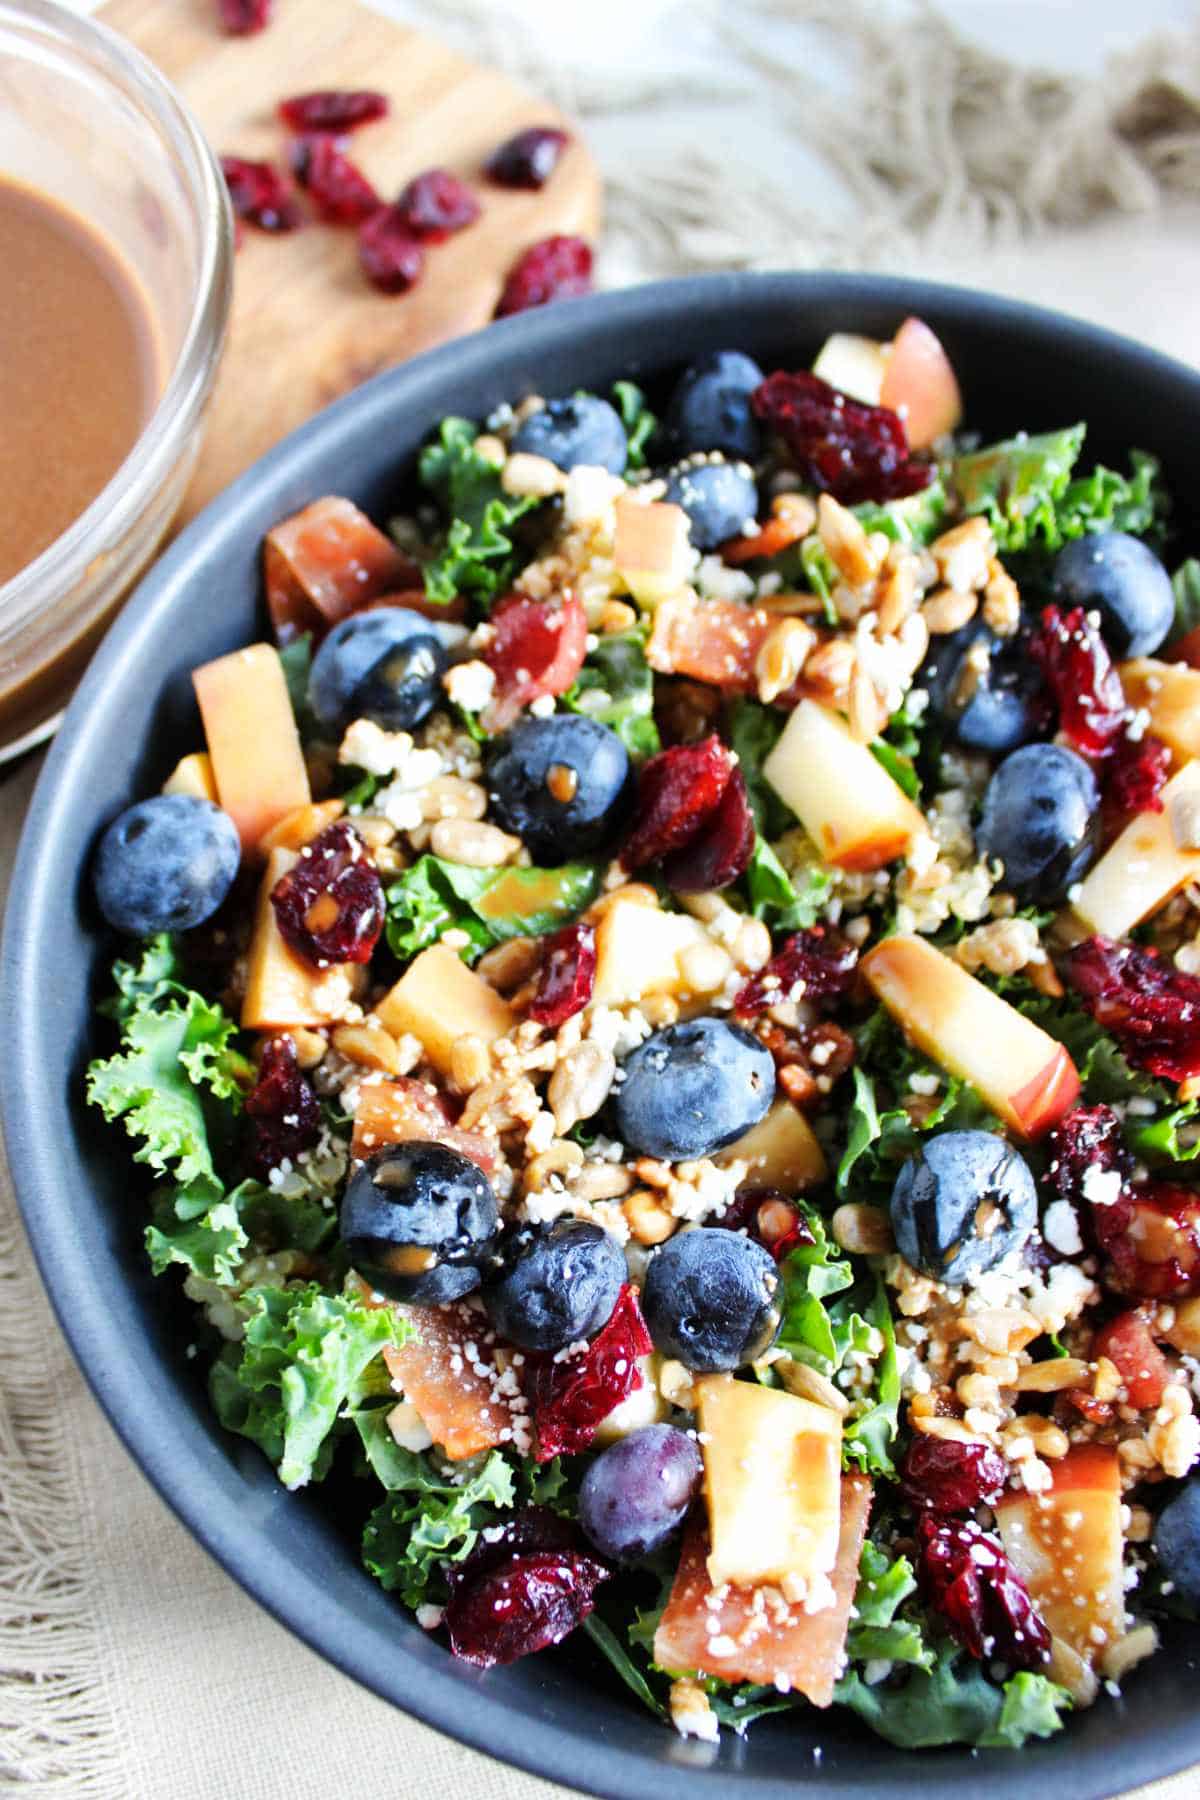 blueberry kale crunch salad in a bowl with feta cheese crumbled on top.